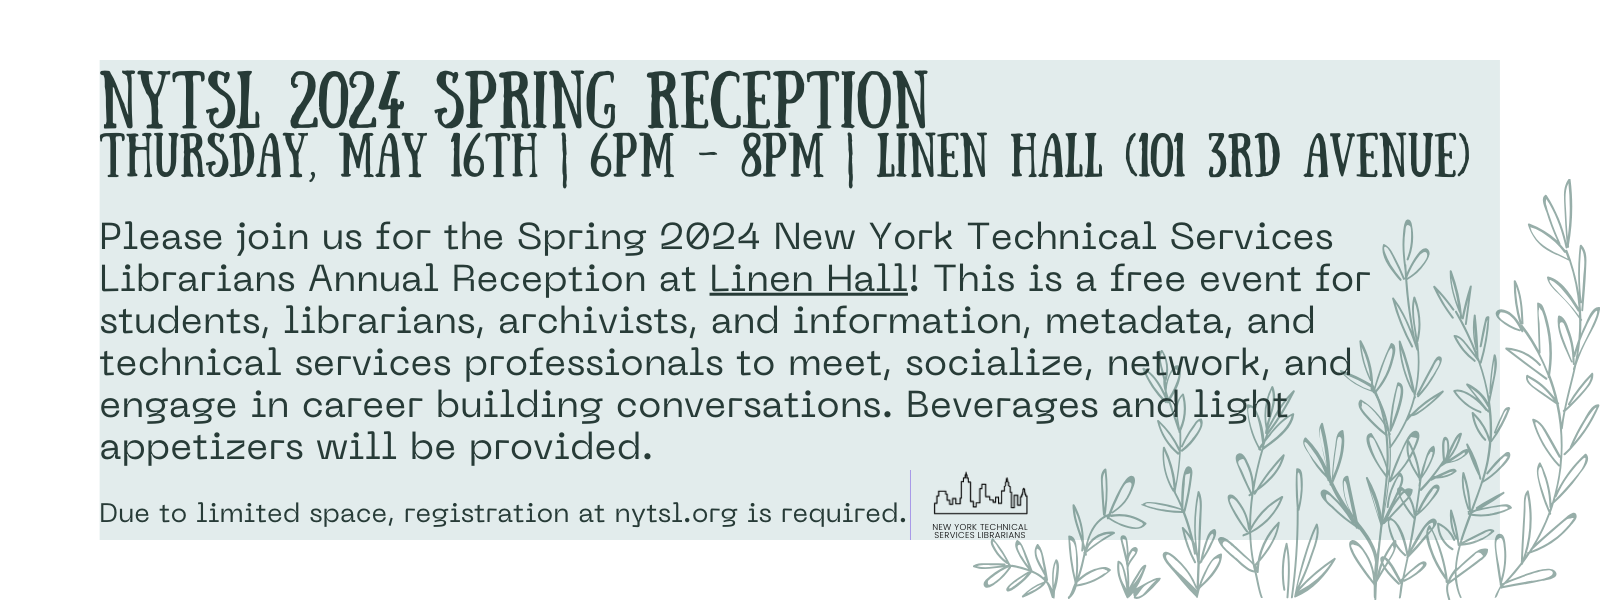 Image Description: Background white rectangle with another smaller one inside in pastel light blue. At the bottom right corner spring shoots with leaves in darker pastel light blue. Large, uppercase text in black at upper left reads “NYTSL 2024 Spring Reception” followed by a smaller font text reading “Thursday, May 16th, 6PM-8pm, Linen Hall (101 3rd Avenue)”. “Linen Hall” is underlined. The header is followed by text reading “Please join us for the Spring 2024 New York Technical Services Librarians Annual Reception at Linen Hall! This is a free event for students, librarians, archivists, and information, metadata, and technical services professionals to meet, socialize, network, and engage in career building conversations. Beverages and light appetizers will be provided.“ Thin line separating the left two thirds of the image from the right one third of the image. Bottom left of the image reads “Due to limited space, registration at nytsl.org is required.” Separated by a thin vertical line is the bottom center graphic of black outline of the New York City skyline followed by text that reads “New York Technical Services Librarians”. End of image description